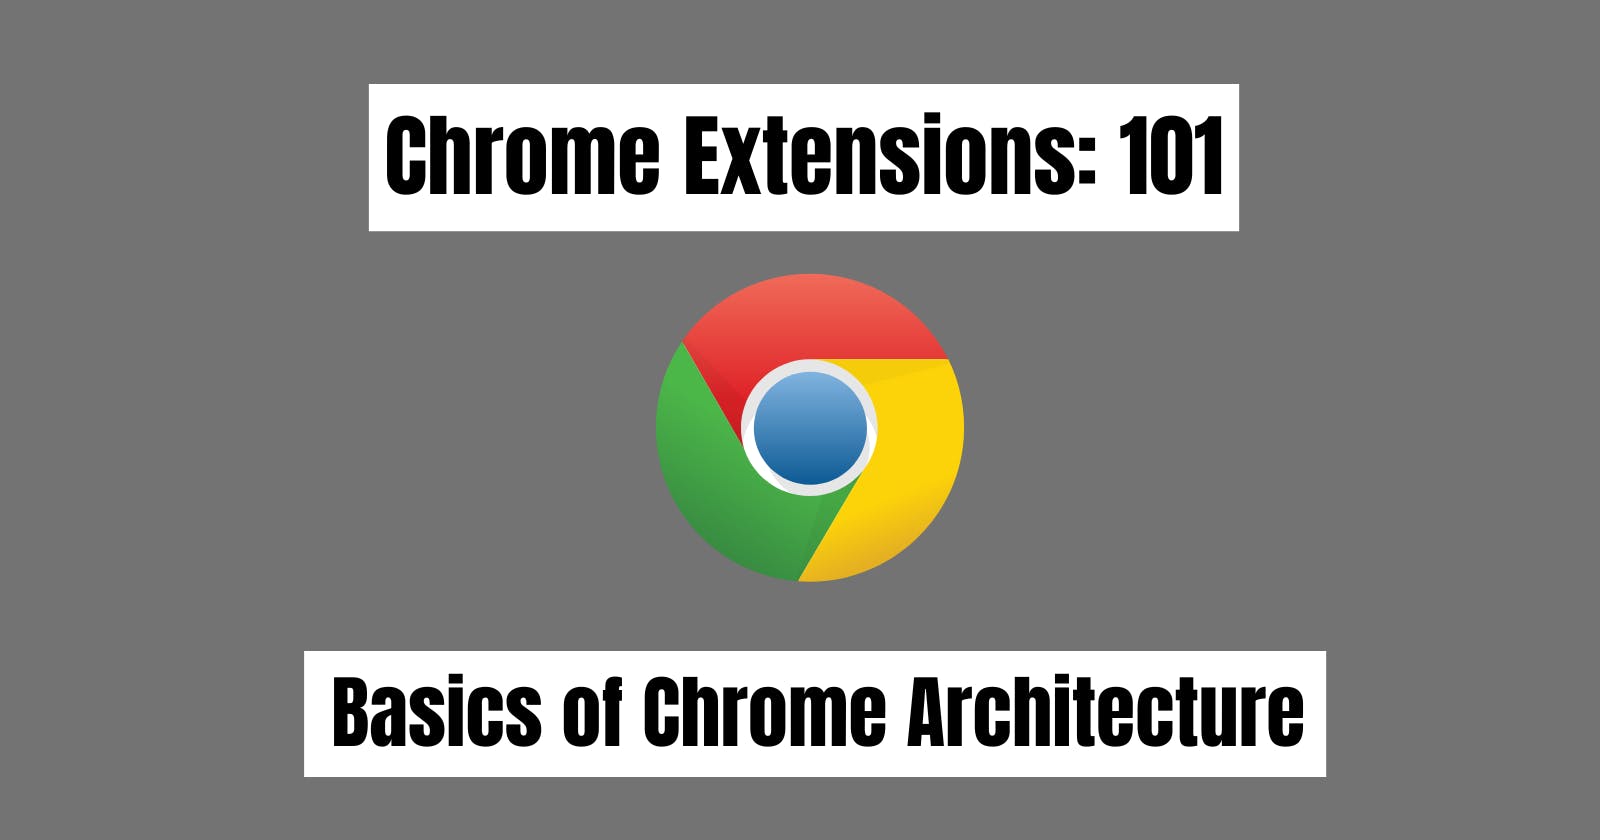 Everything you need to know about "Chrome Extensions"